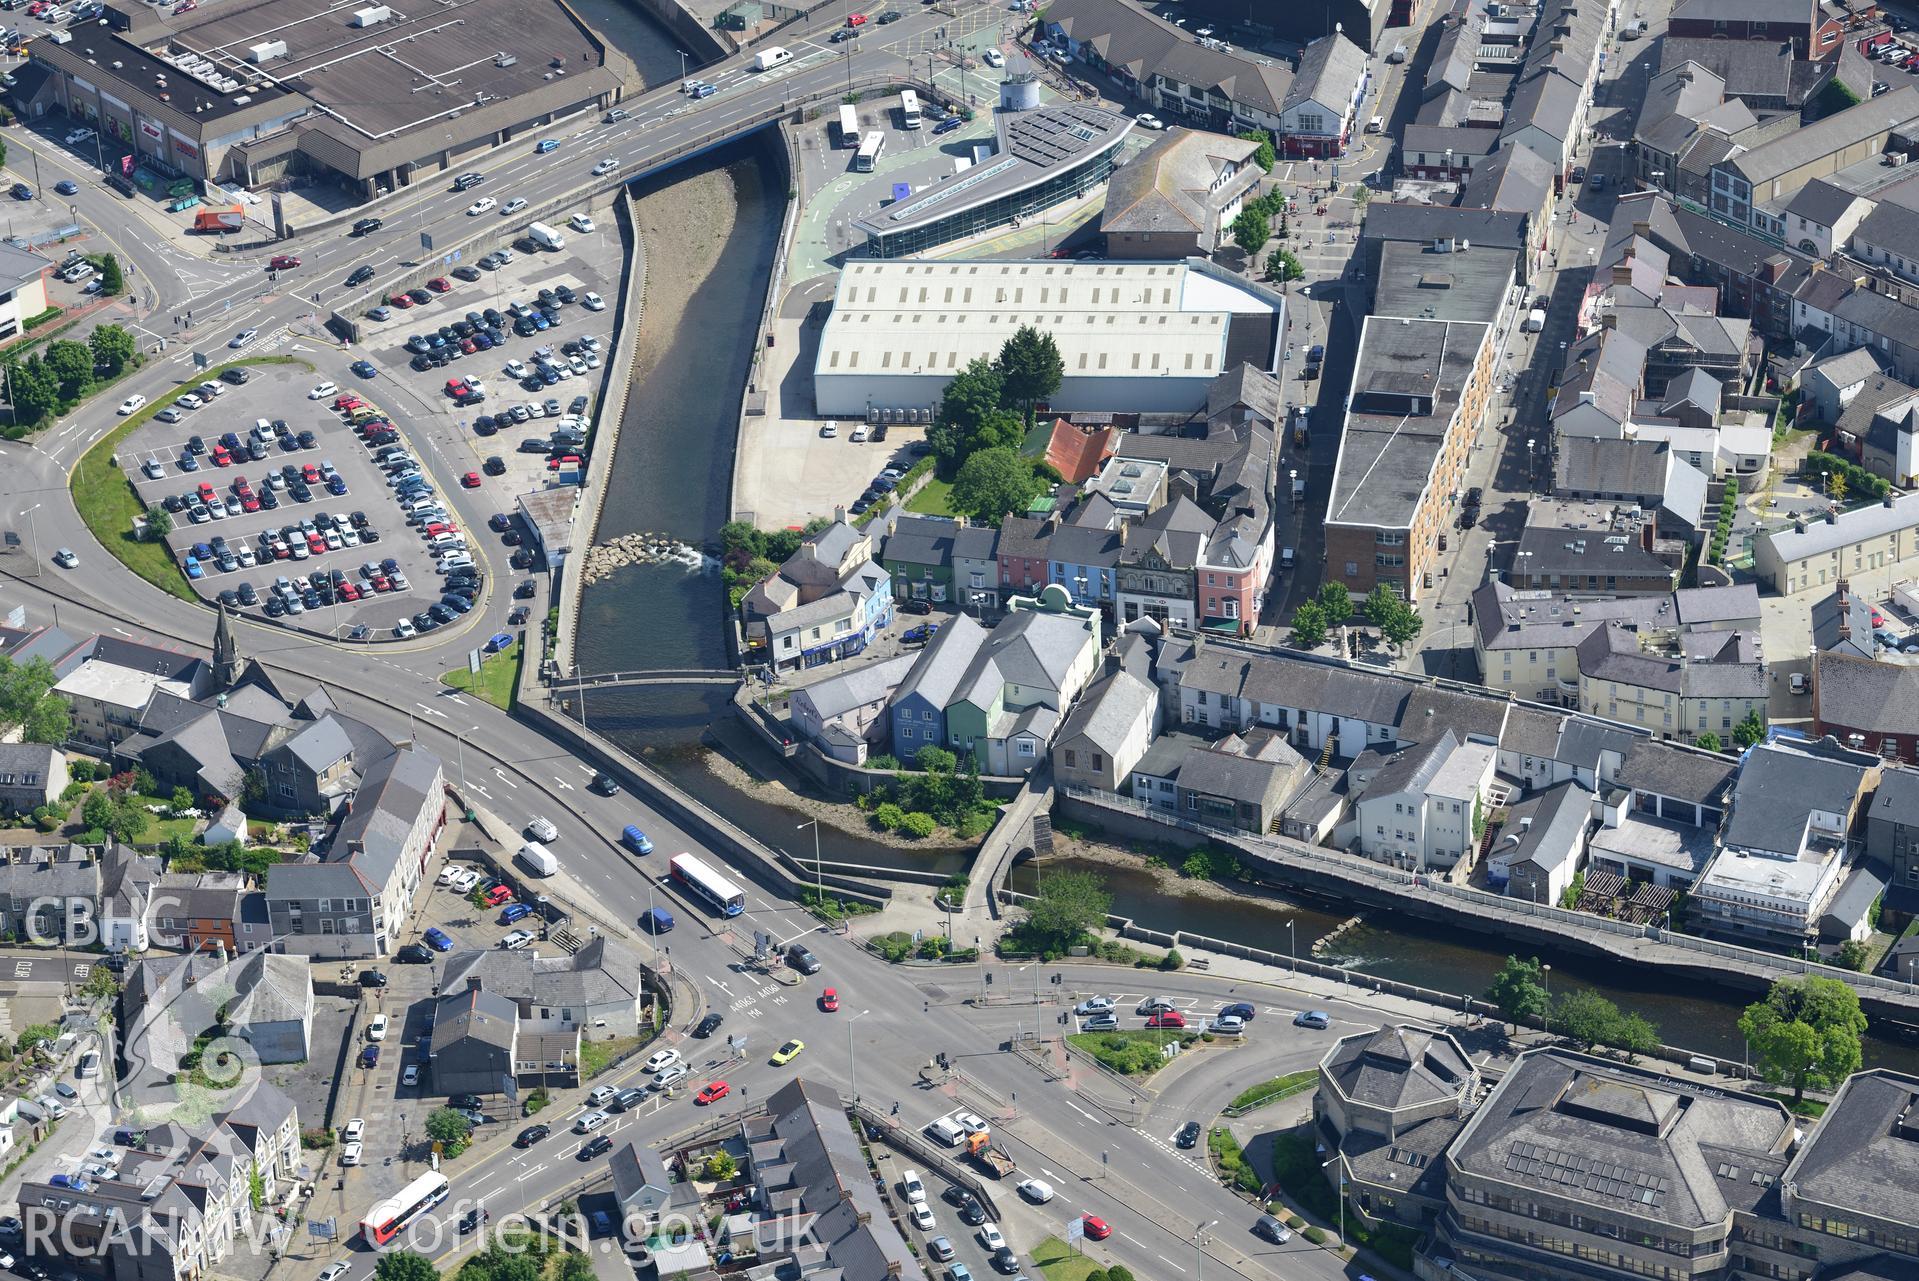 The old bridge over the river Ogwr; Unitarian Chapel and County Borough Council Civic Offices, Bridgend. Oblique aerial photograph taken during the Royal Commission's programme of archaeological aerial reconnaissance by Toby Driver on 19th June 2015.